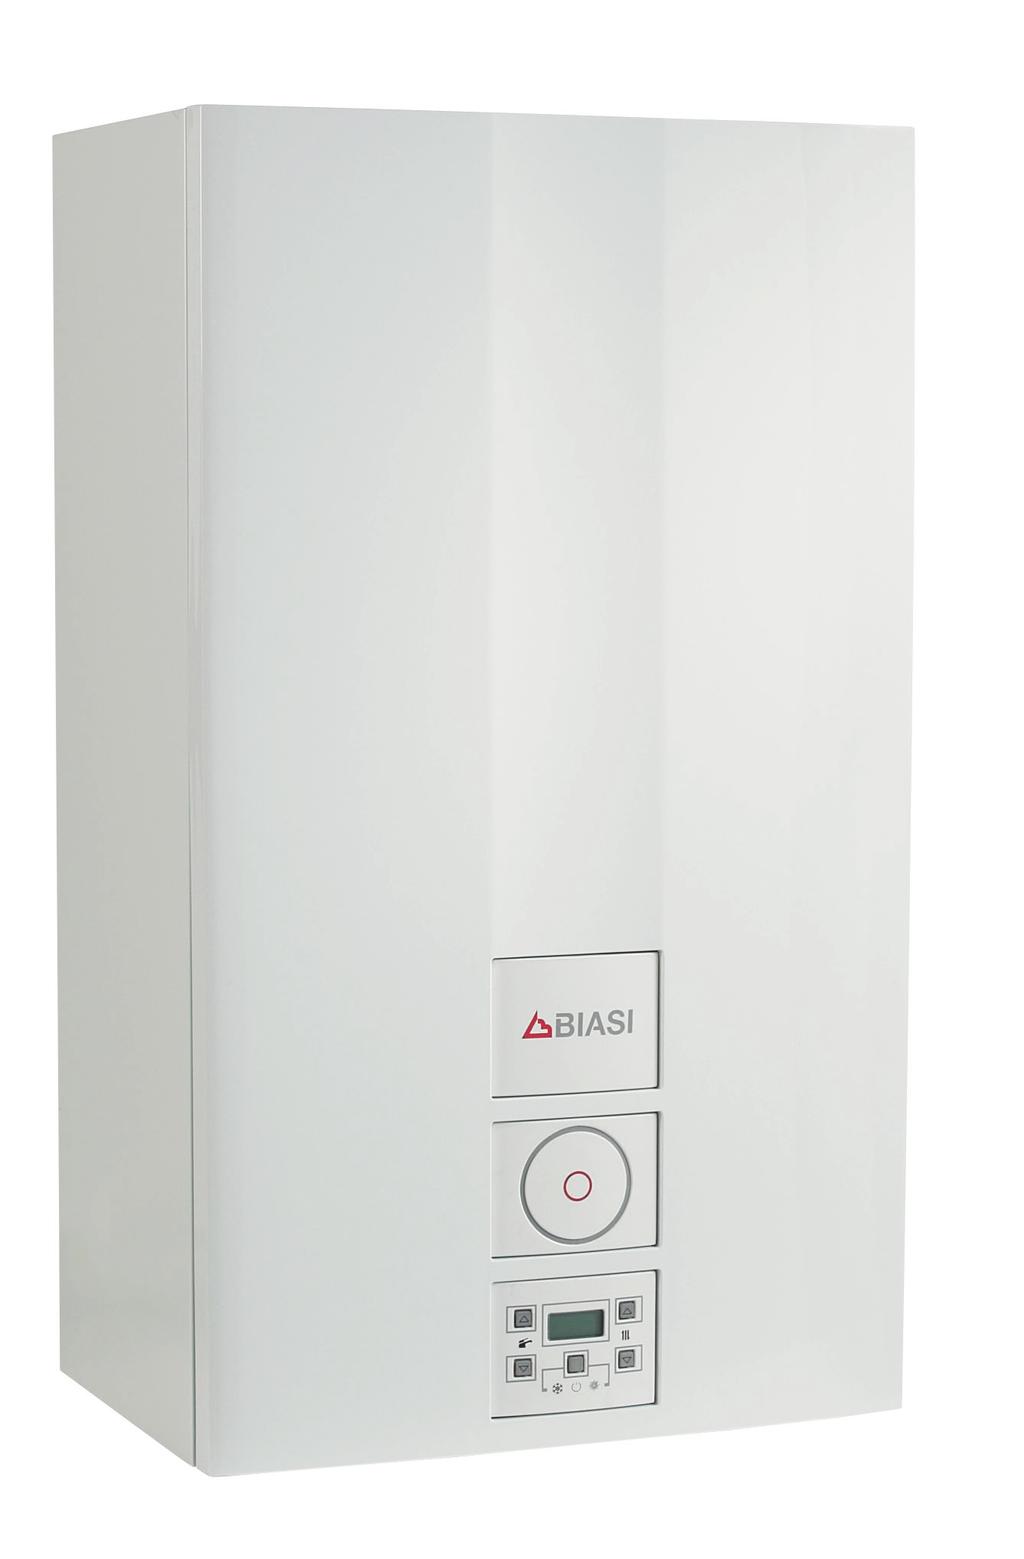 complete boiler management control a hard-wired remote that not only acts as the system s main interface anywhere in the property, it also provides homeowners with a variety of